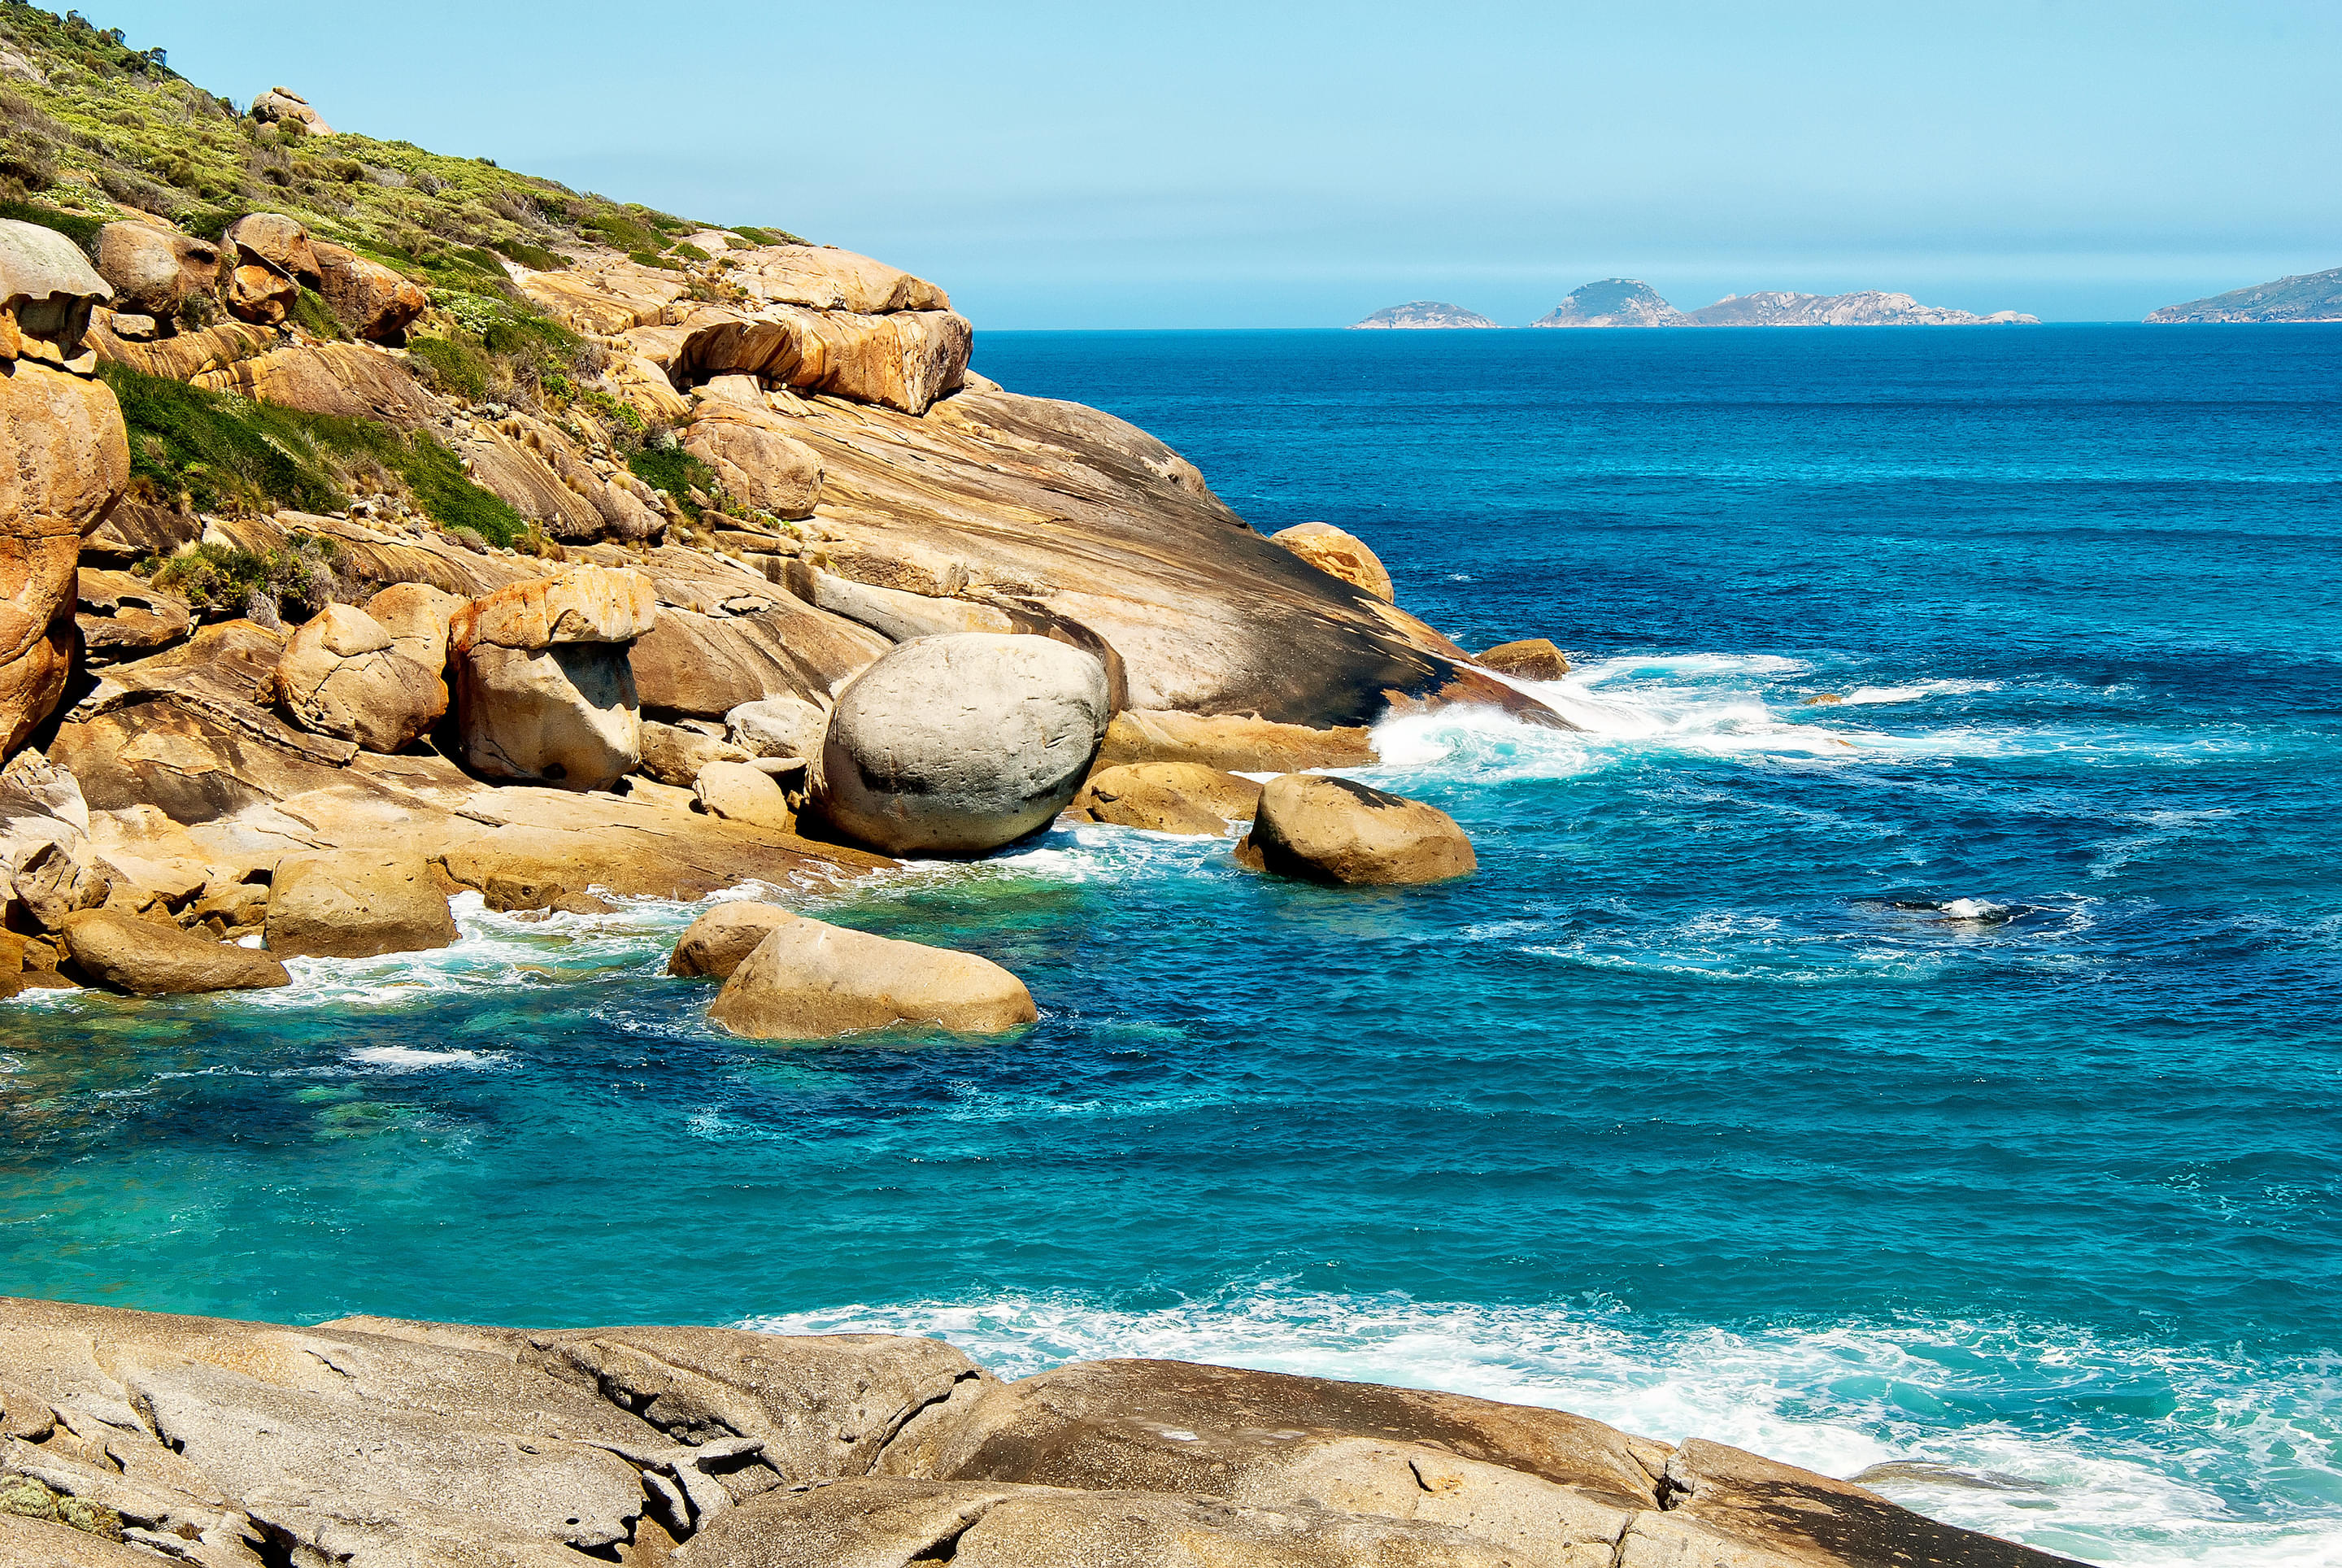 Wilsons Promontory National Park Overview